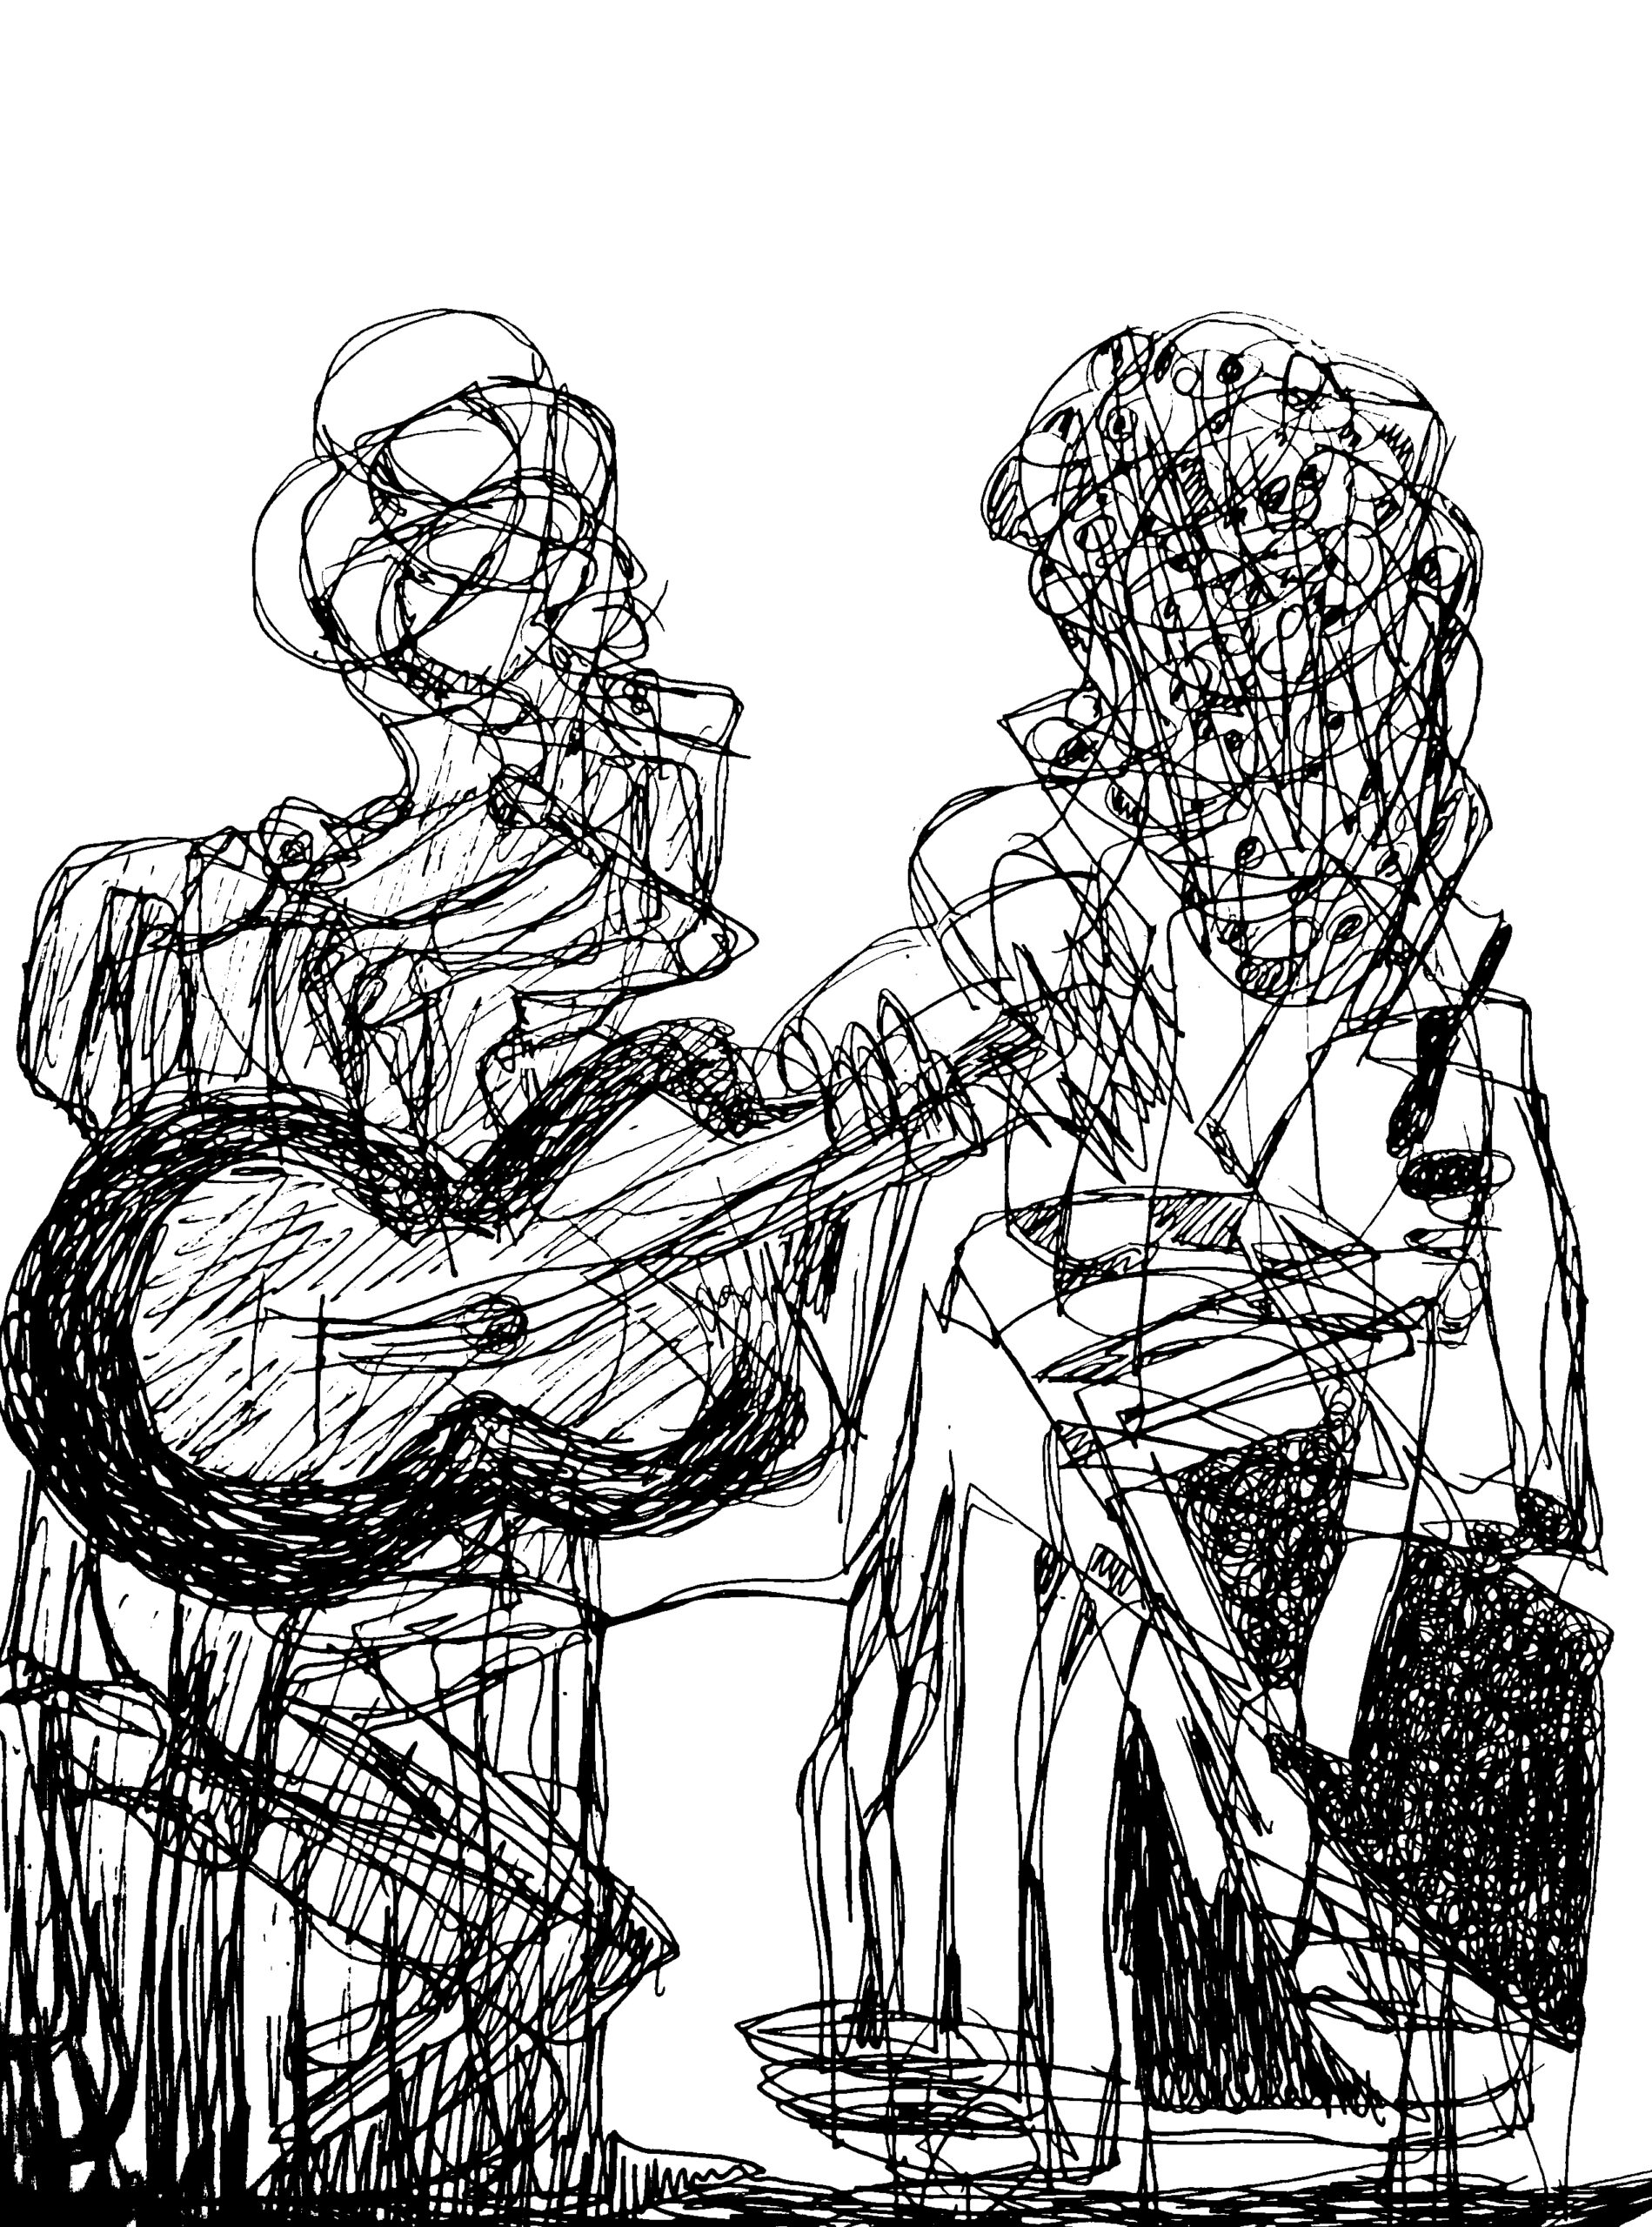 Line drawing of two people by by David Swartz from Online Issue 43.2